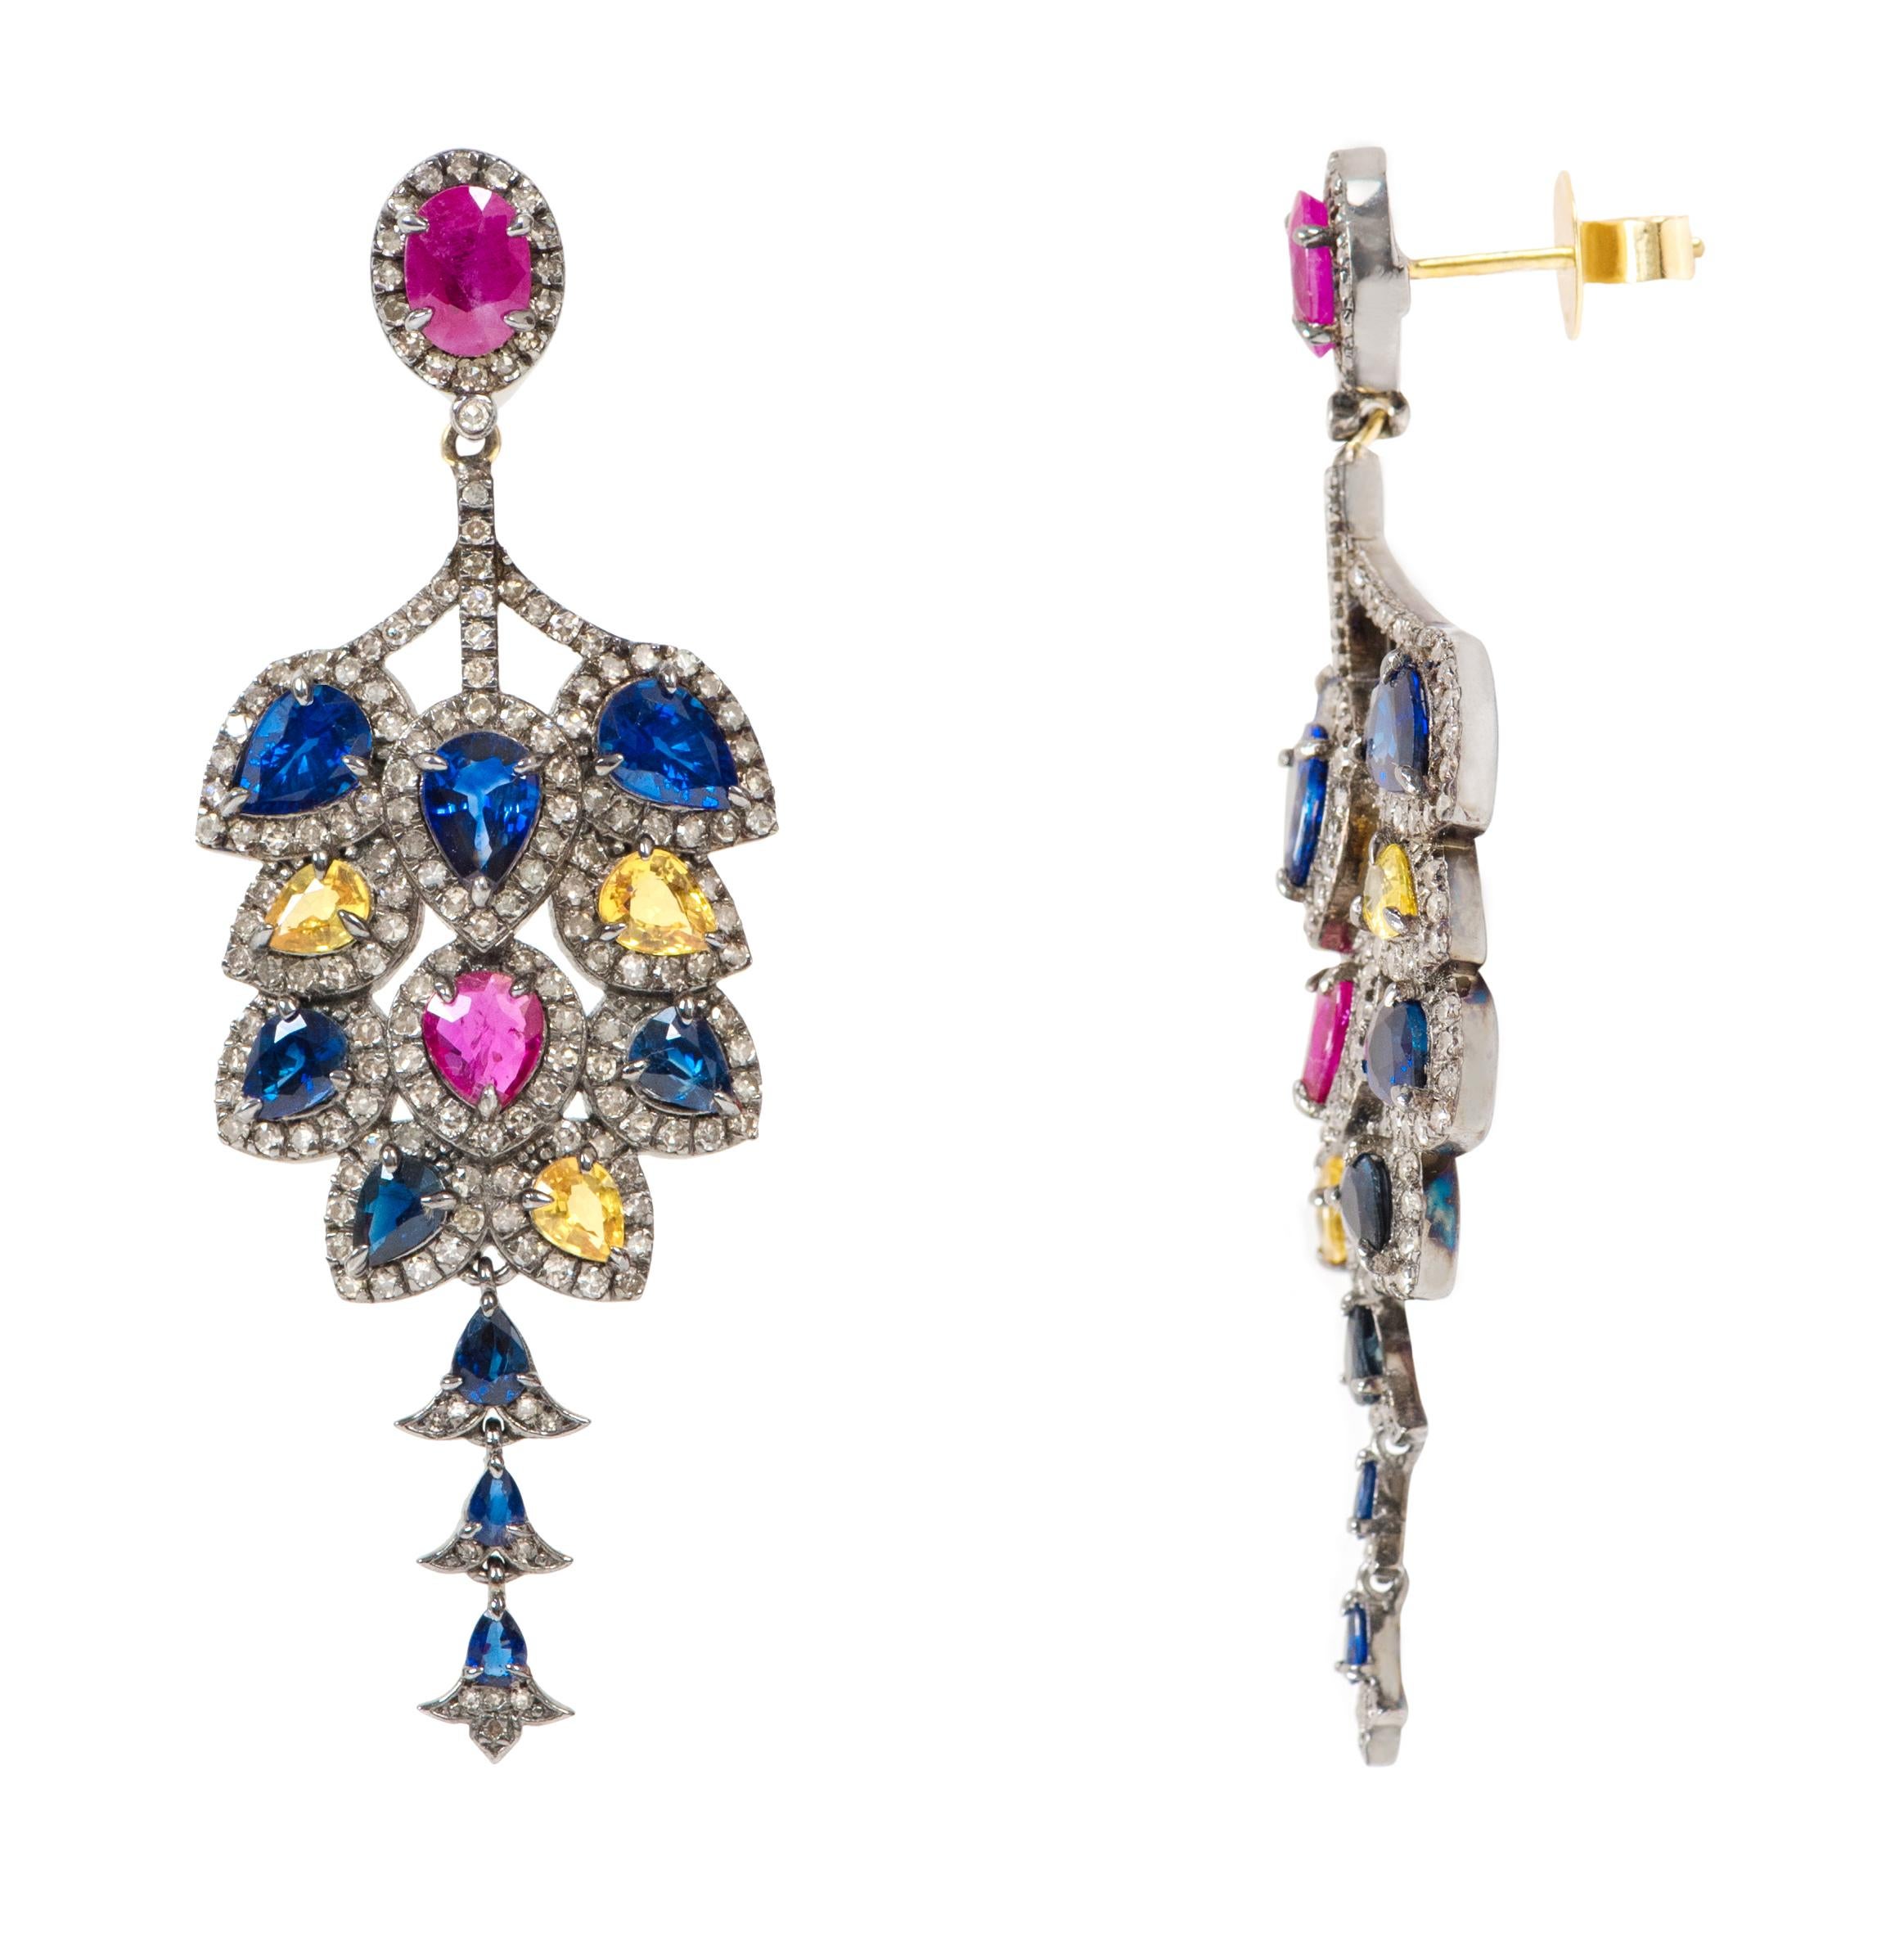 15.32 Carat Sapphire, Diamond, and Ruby Dangle Cocktail Earrings in Art Deco Style

This Victorian era fascinating art-deco style oxford blue sapphire, vivid red ruby, tuscany yellow sapphire and diamond hanging earring is phenomenal. The earring is